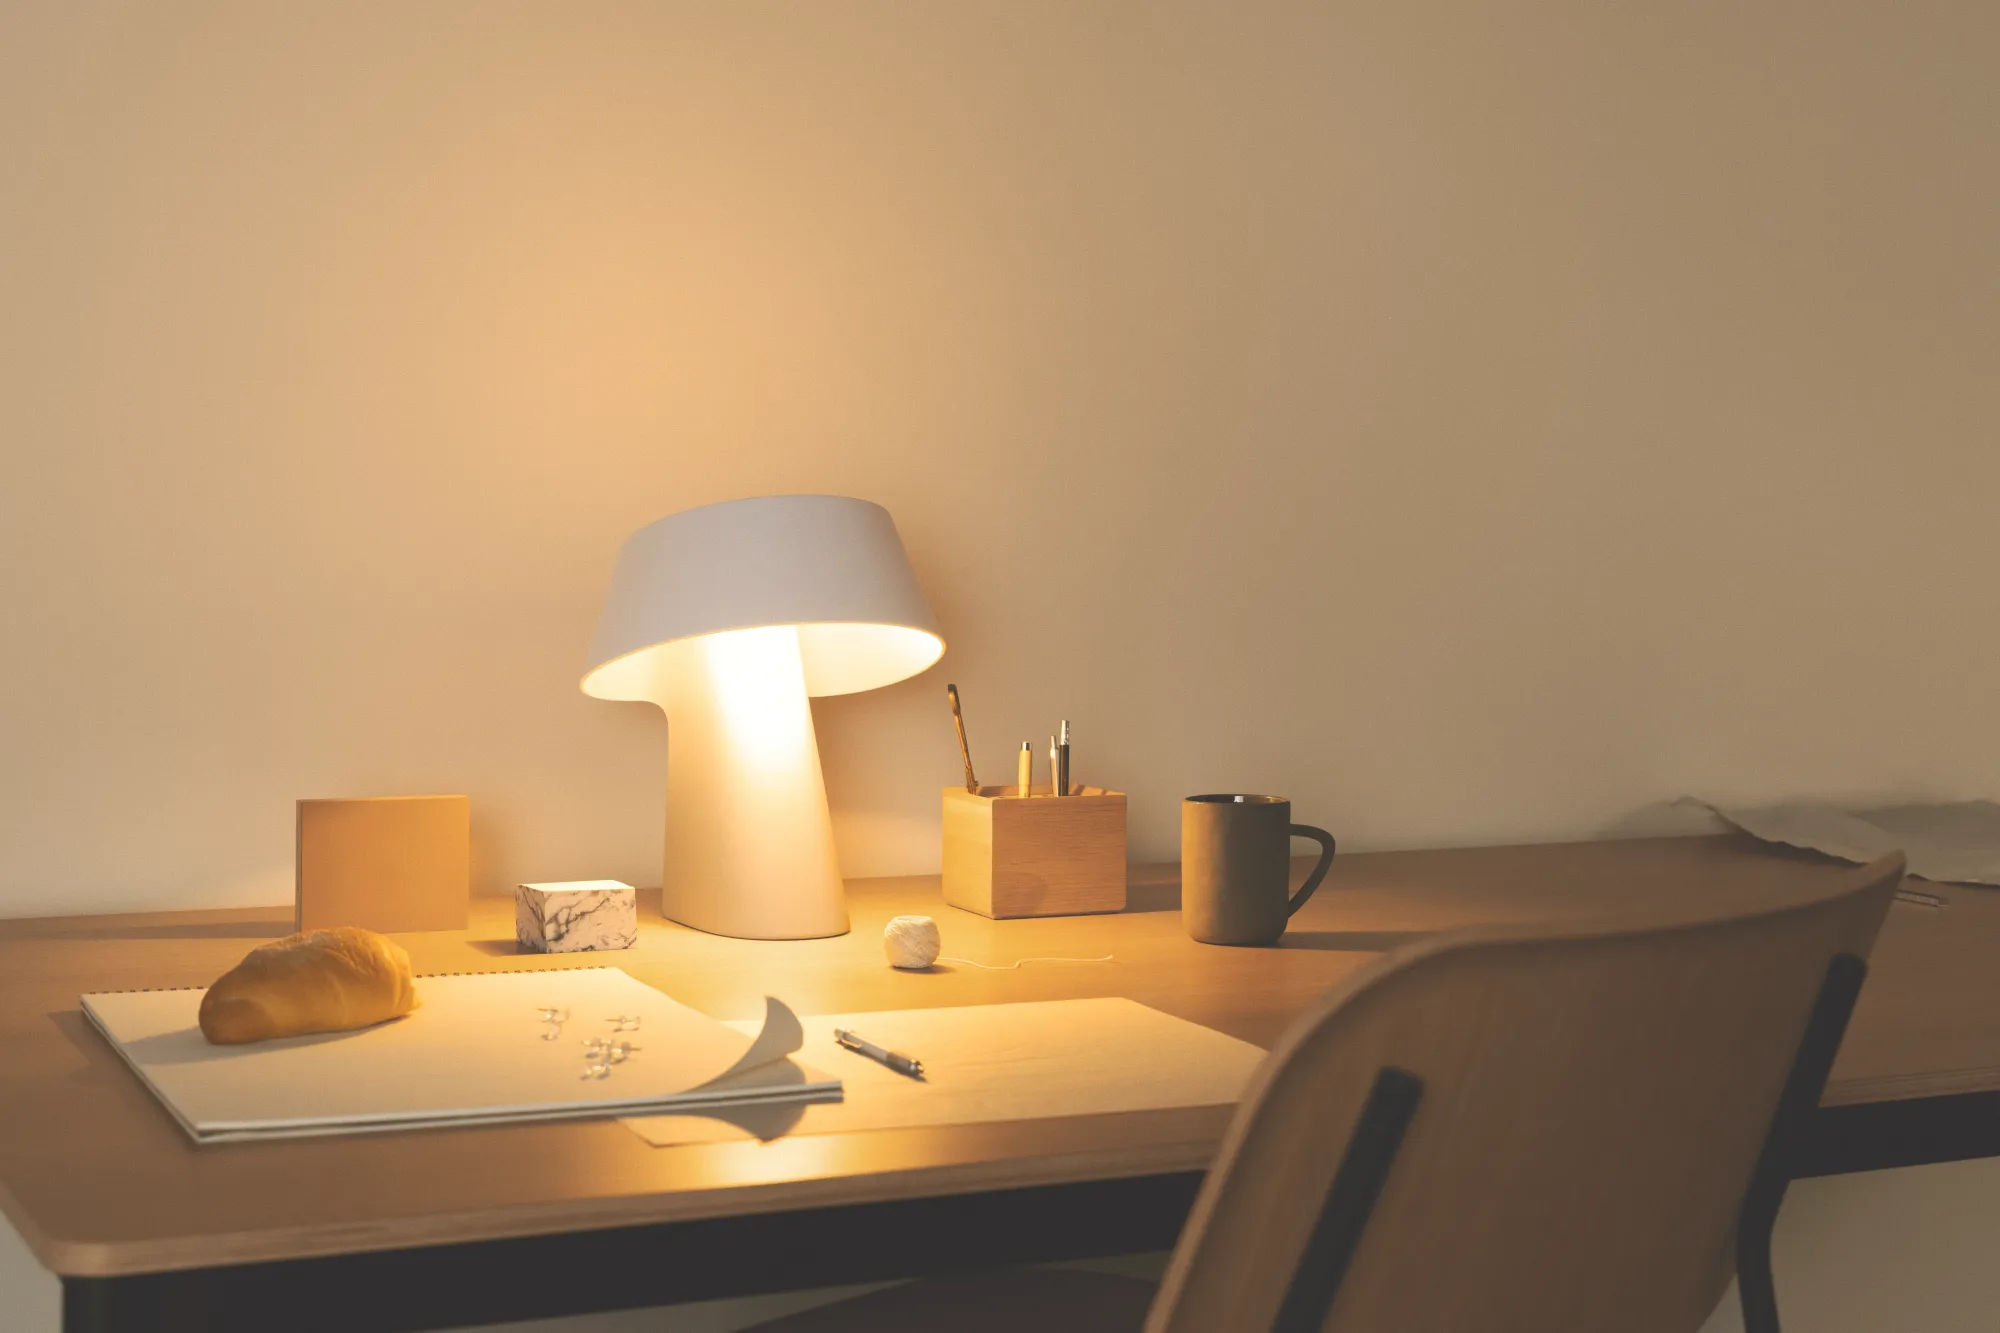 A desk lamp with a blank sketch pad, some drawing materials, a cup of coffee, and a piece of bread is illuminated with light by Gantri’s Fold table light